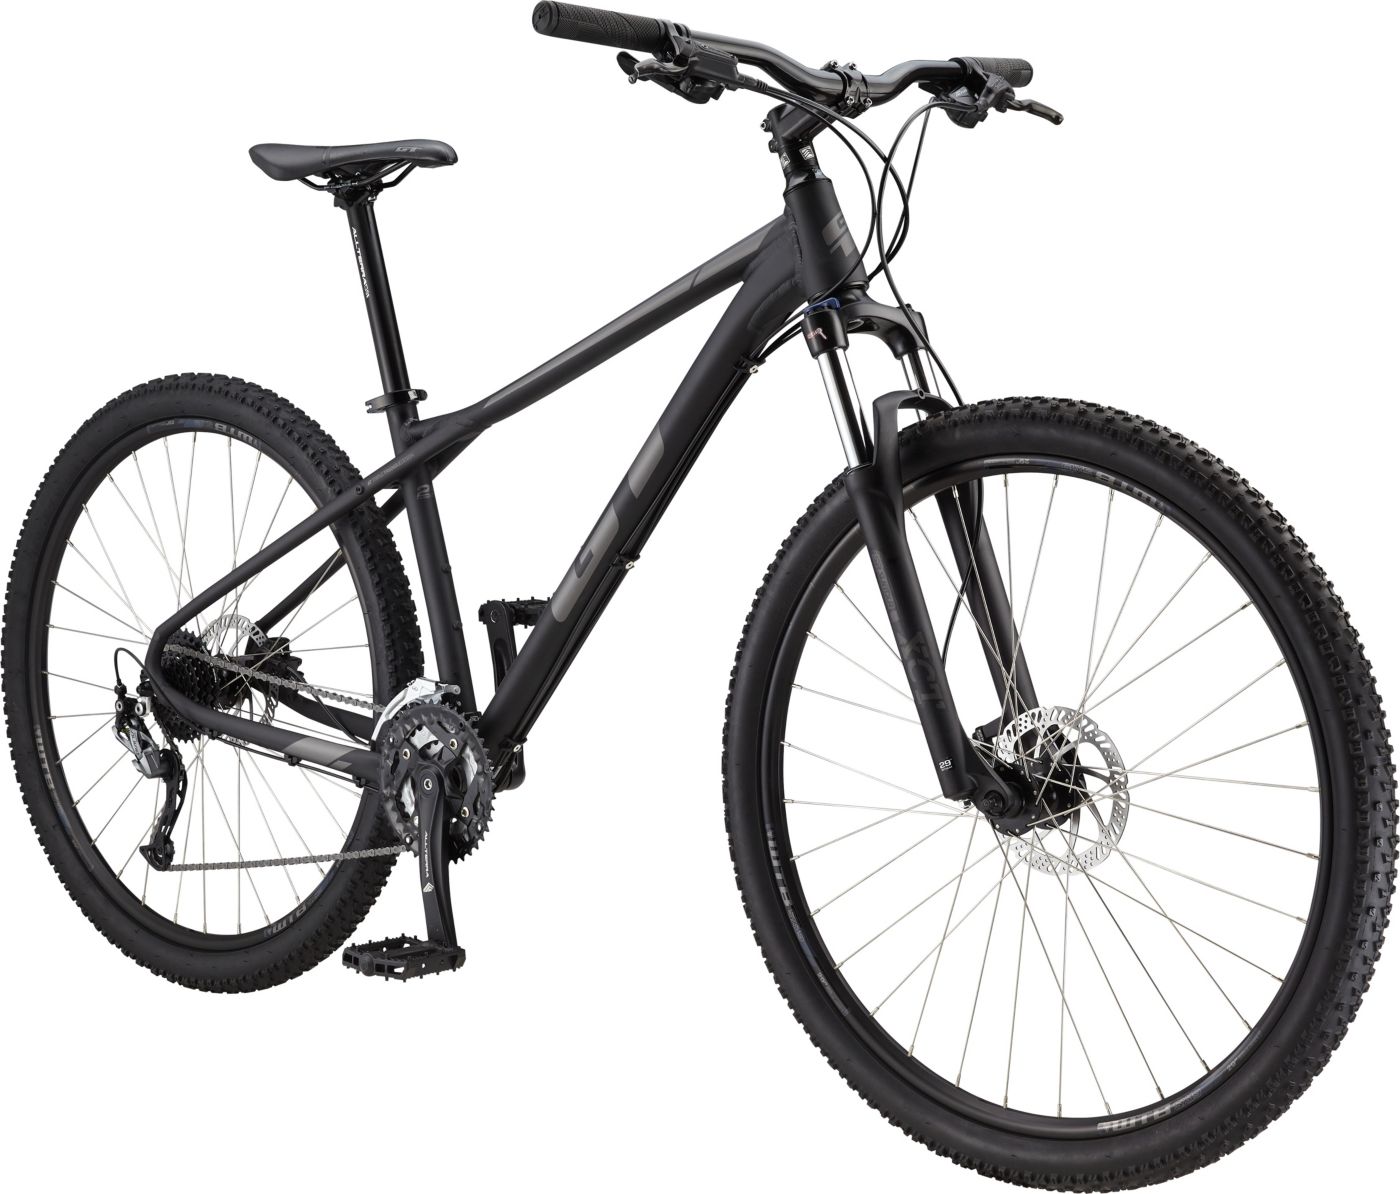 GT Avalanche Mountain Bike Best Price Guarantee at DICK'S